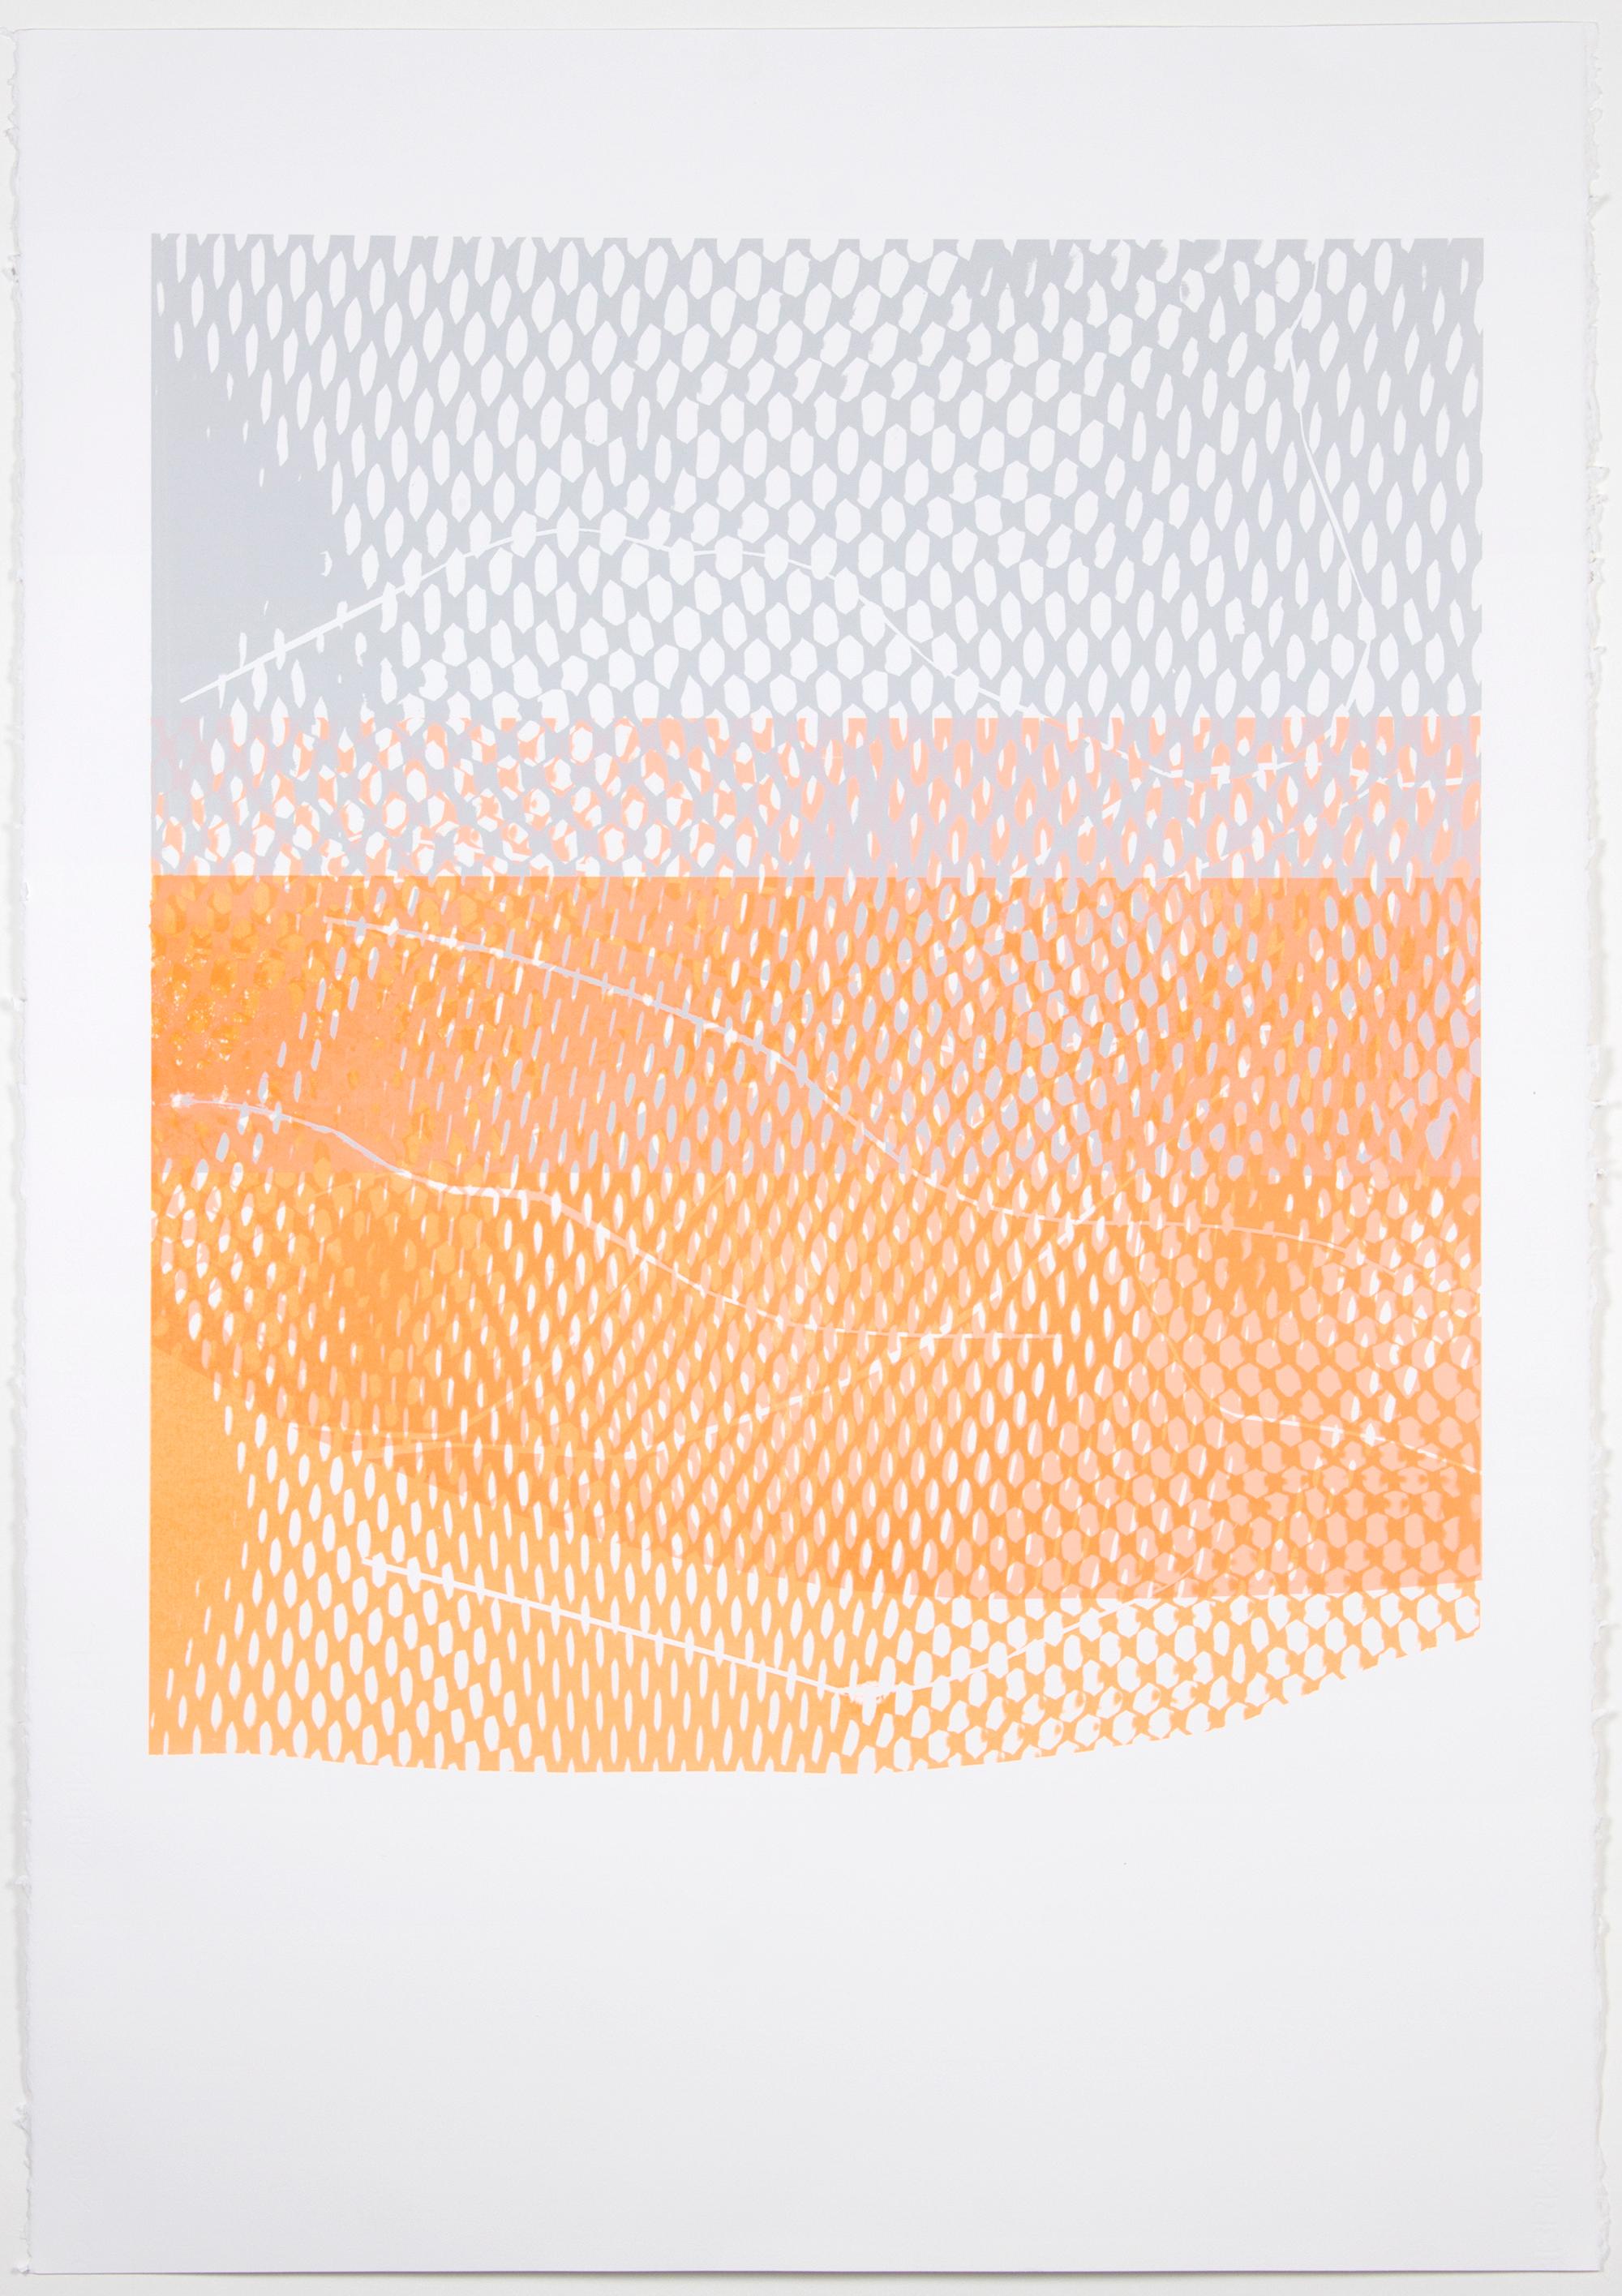 Natalie Ryde Abstract Print - Shift #8 - Abstract artwork on paper - multilayered screenprint